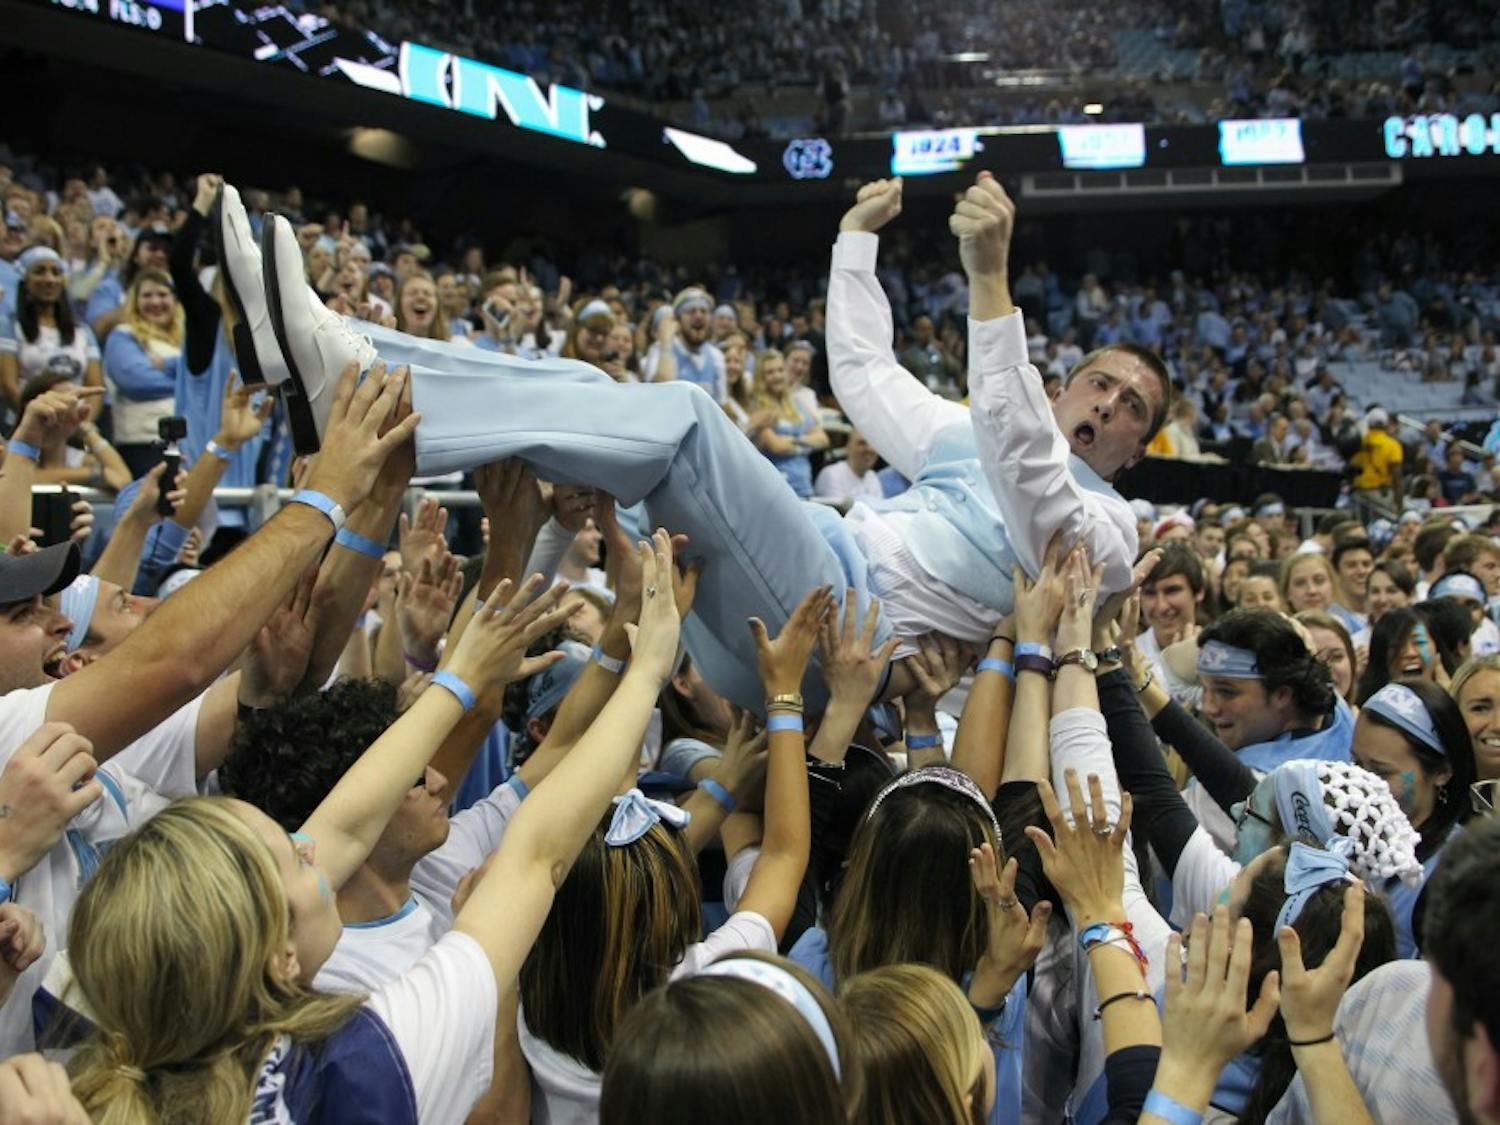 Clay Browning, a former graduate assistant coach for UNC football, crowd surfs in the bleacher level student section of the Dean Smith Center before the UNC men's basketball game vs. Duke on March 4, 2017.